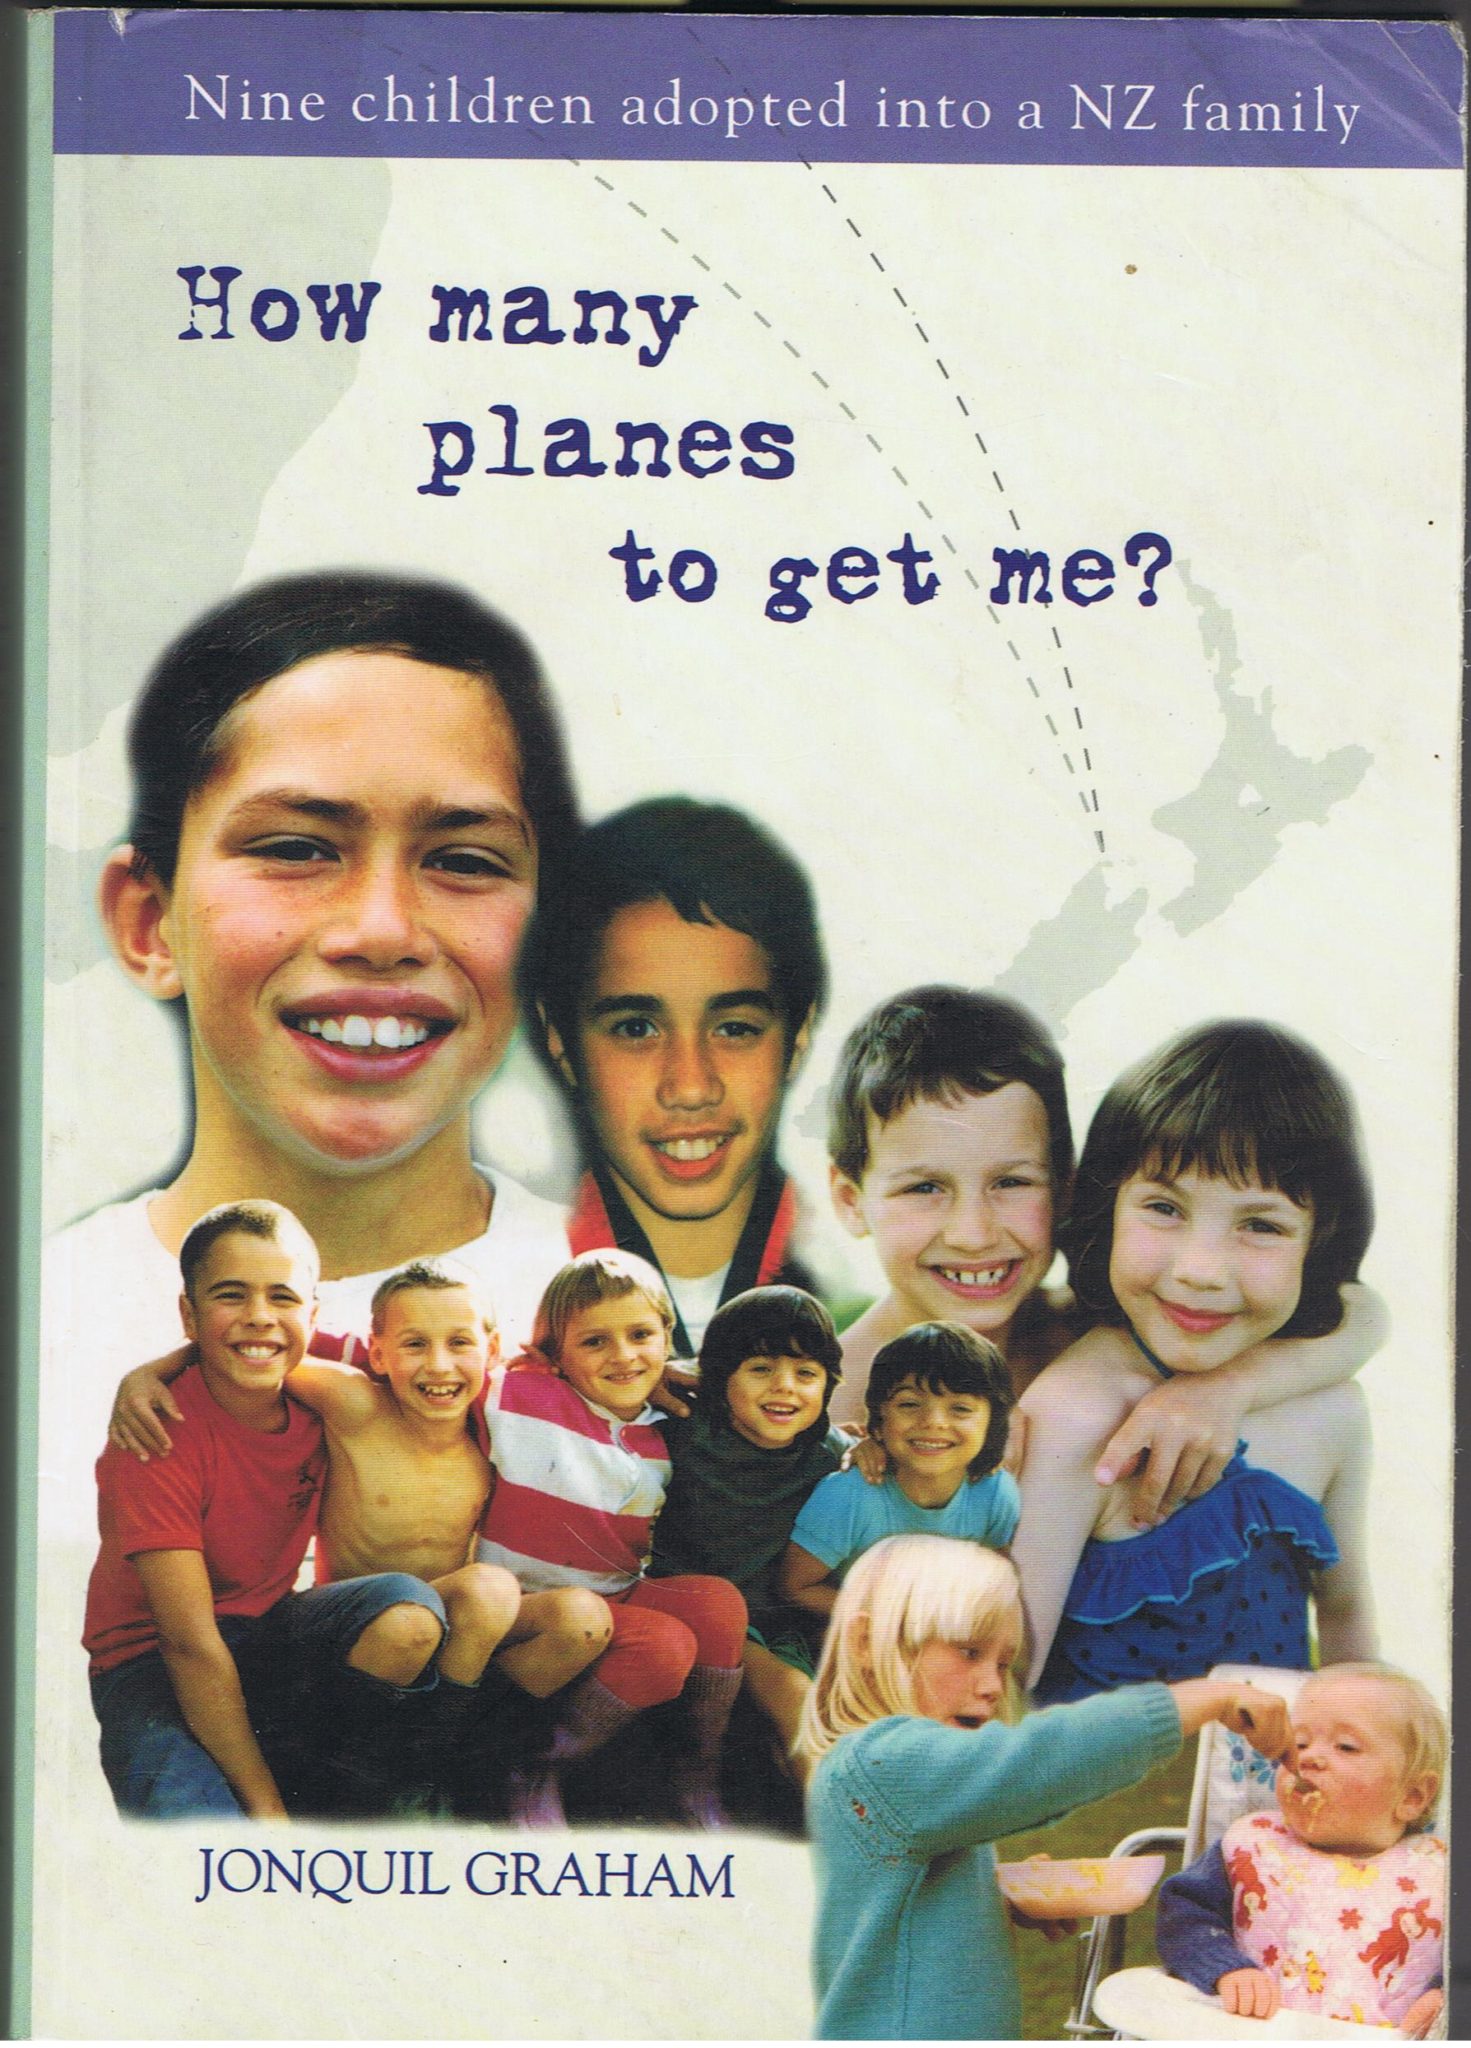 FREE: How Many Planes to get me? Nine children adopted into a NZ family by Jonquil Graham